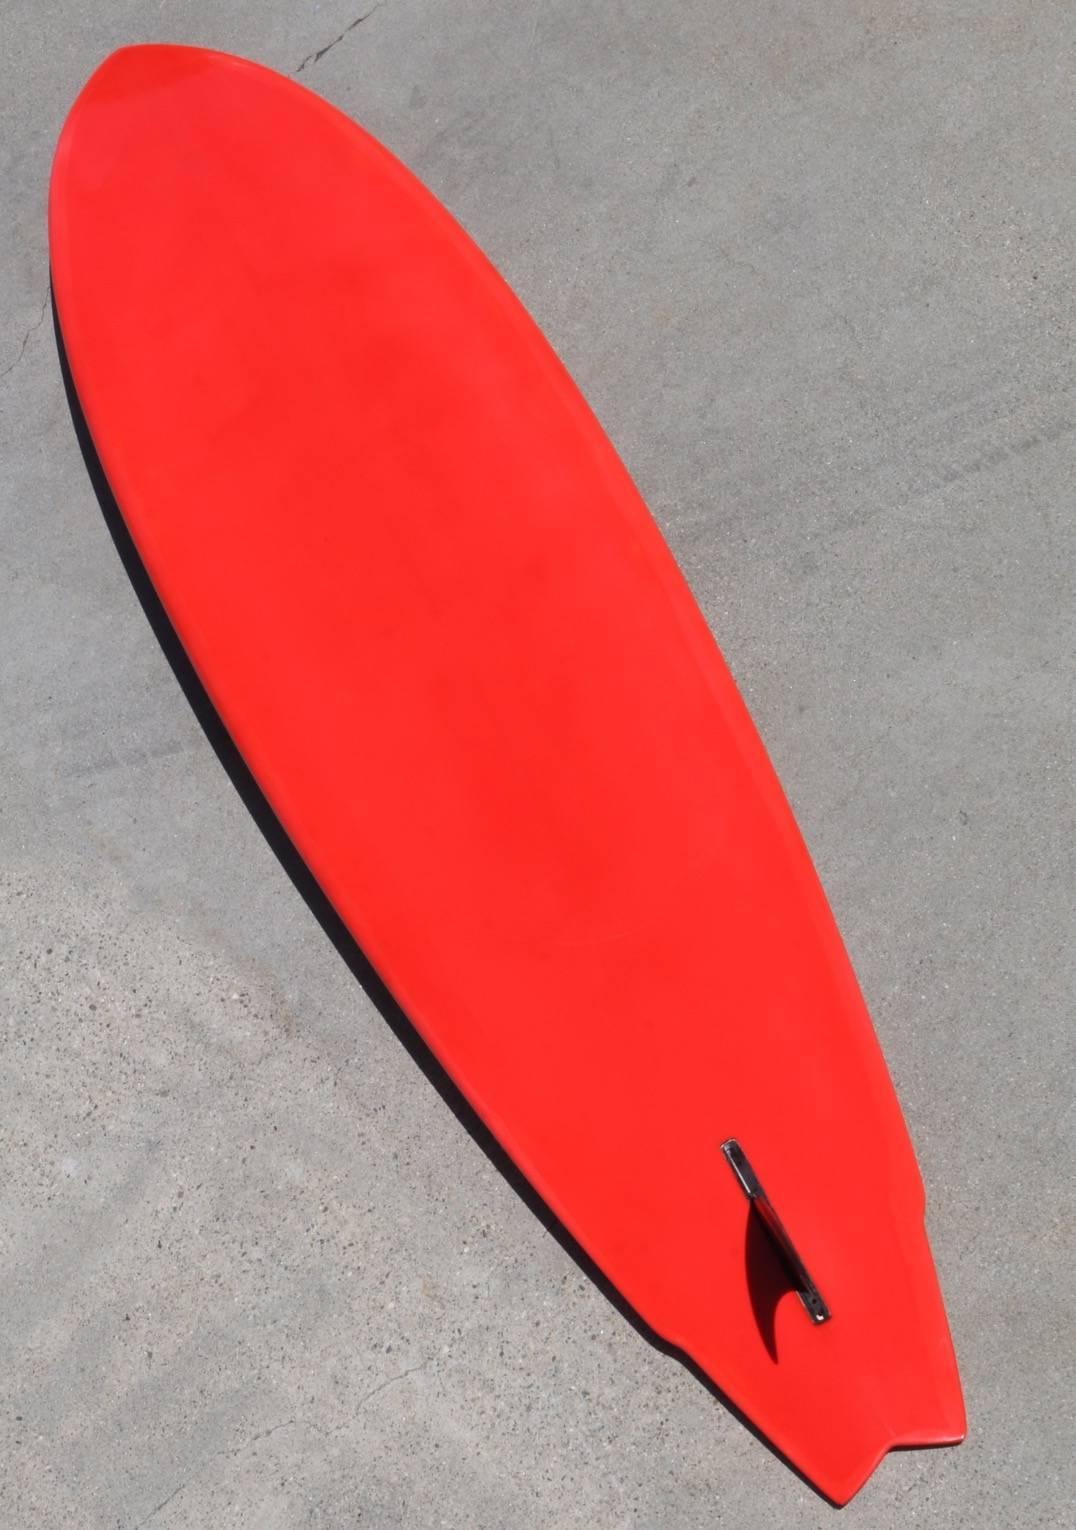 Late 20th Century Lightning Bolt Surfboard circa 1975 Shaped by Terry Martin